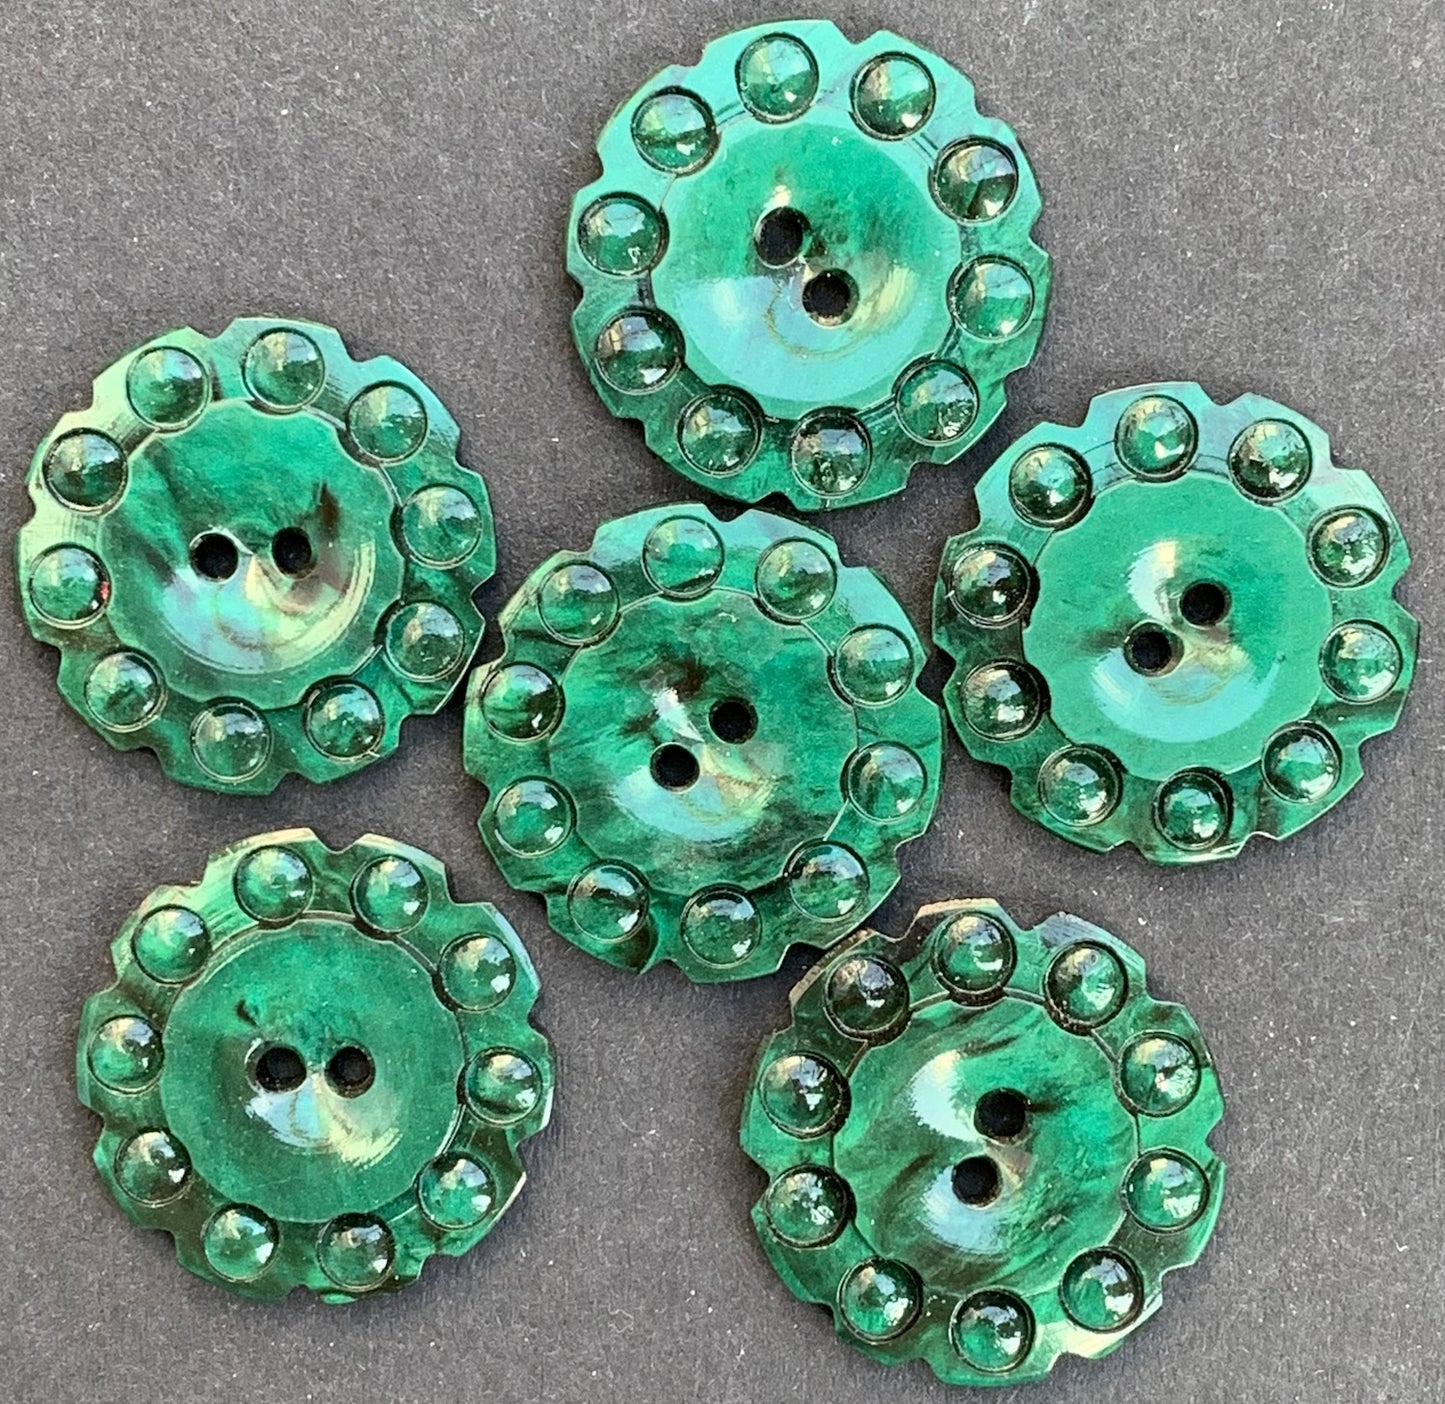 6 Forest Green 1930s  Buttons  - 2.2cm